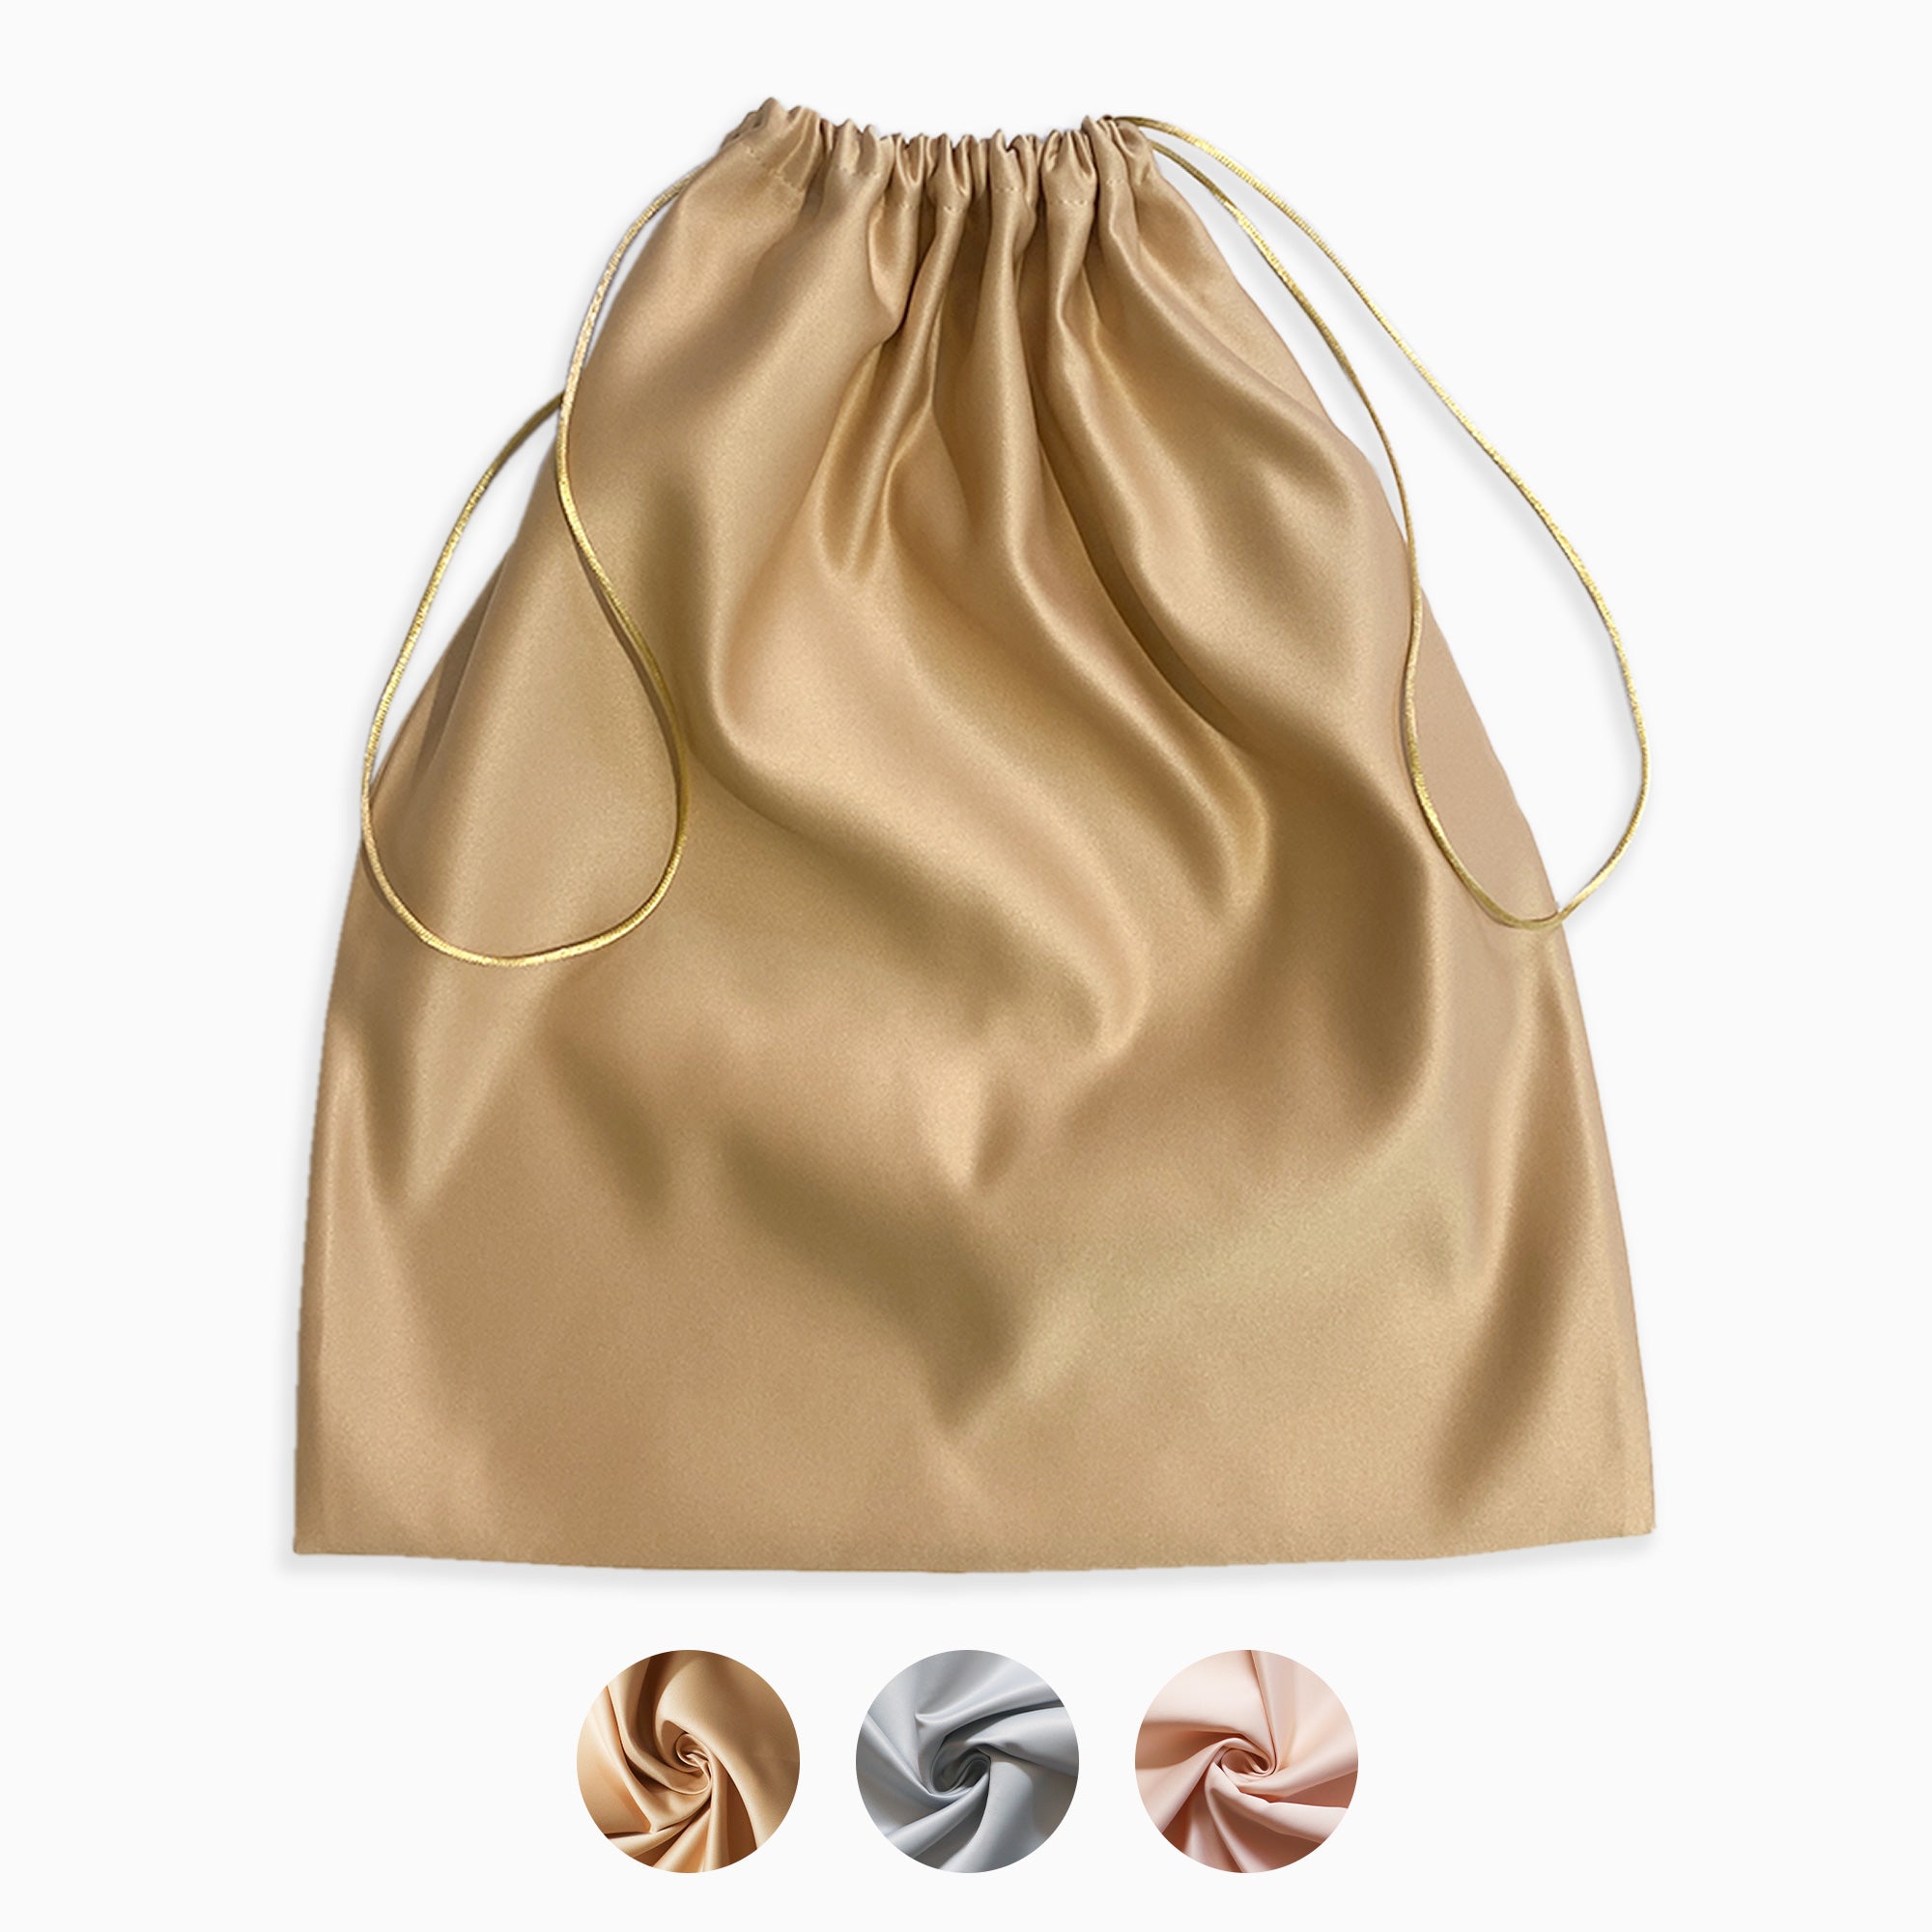 What is a dust bag?. If you've ever purchased a luxury…, by Jenny Pink